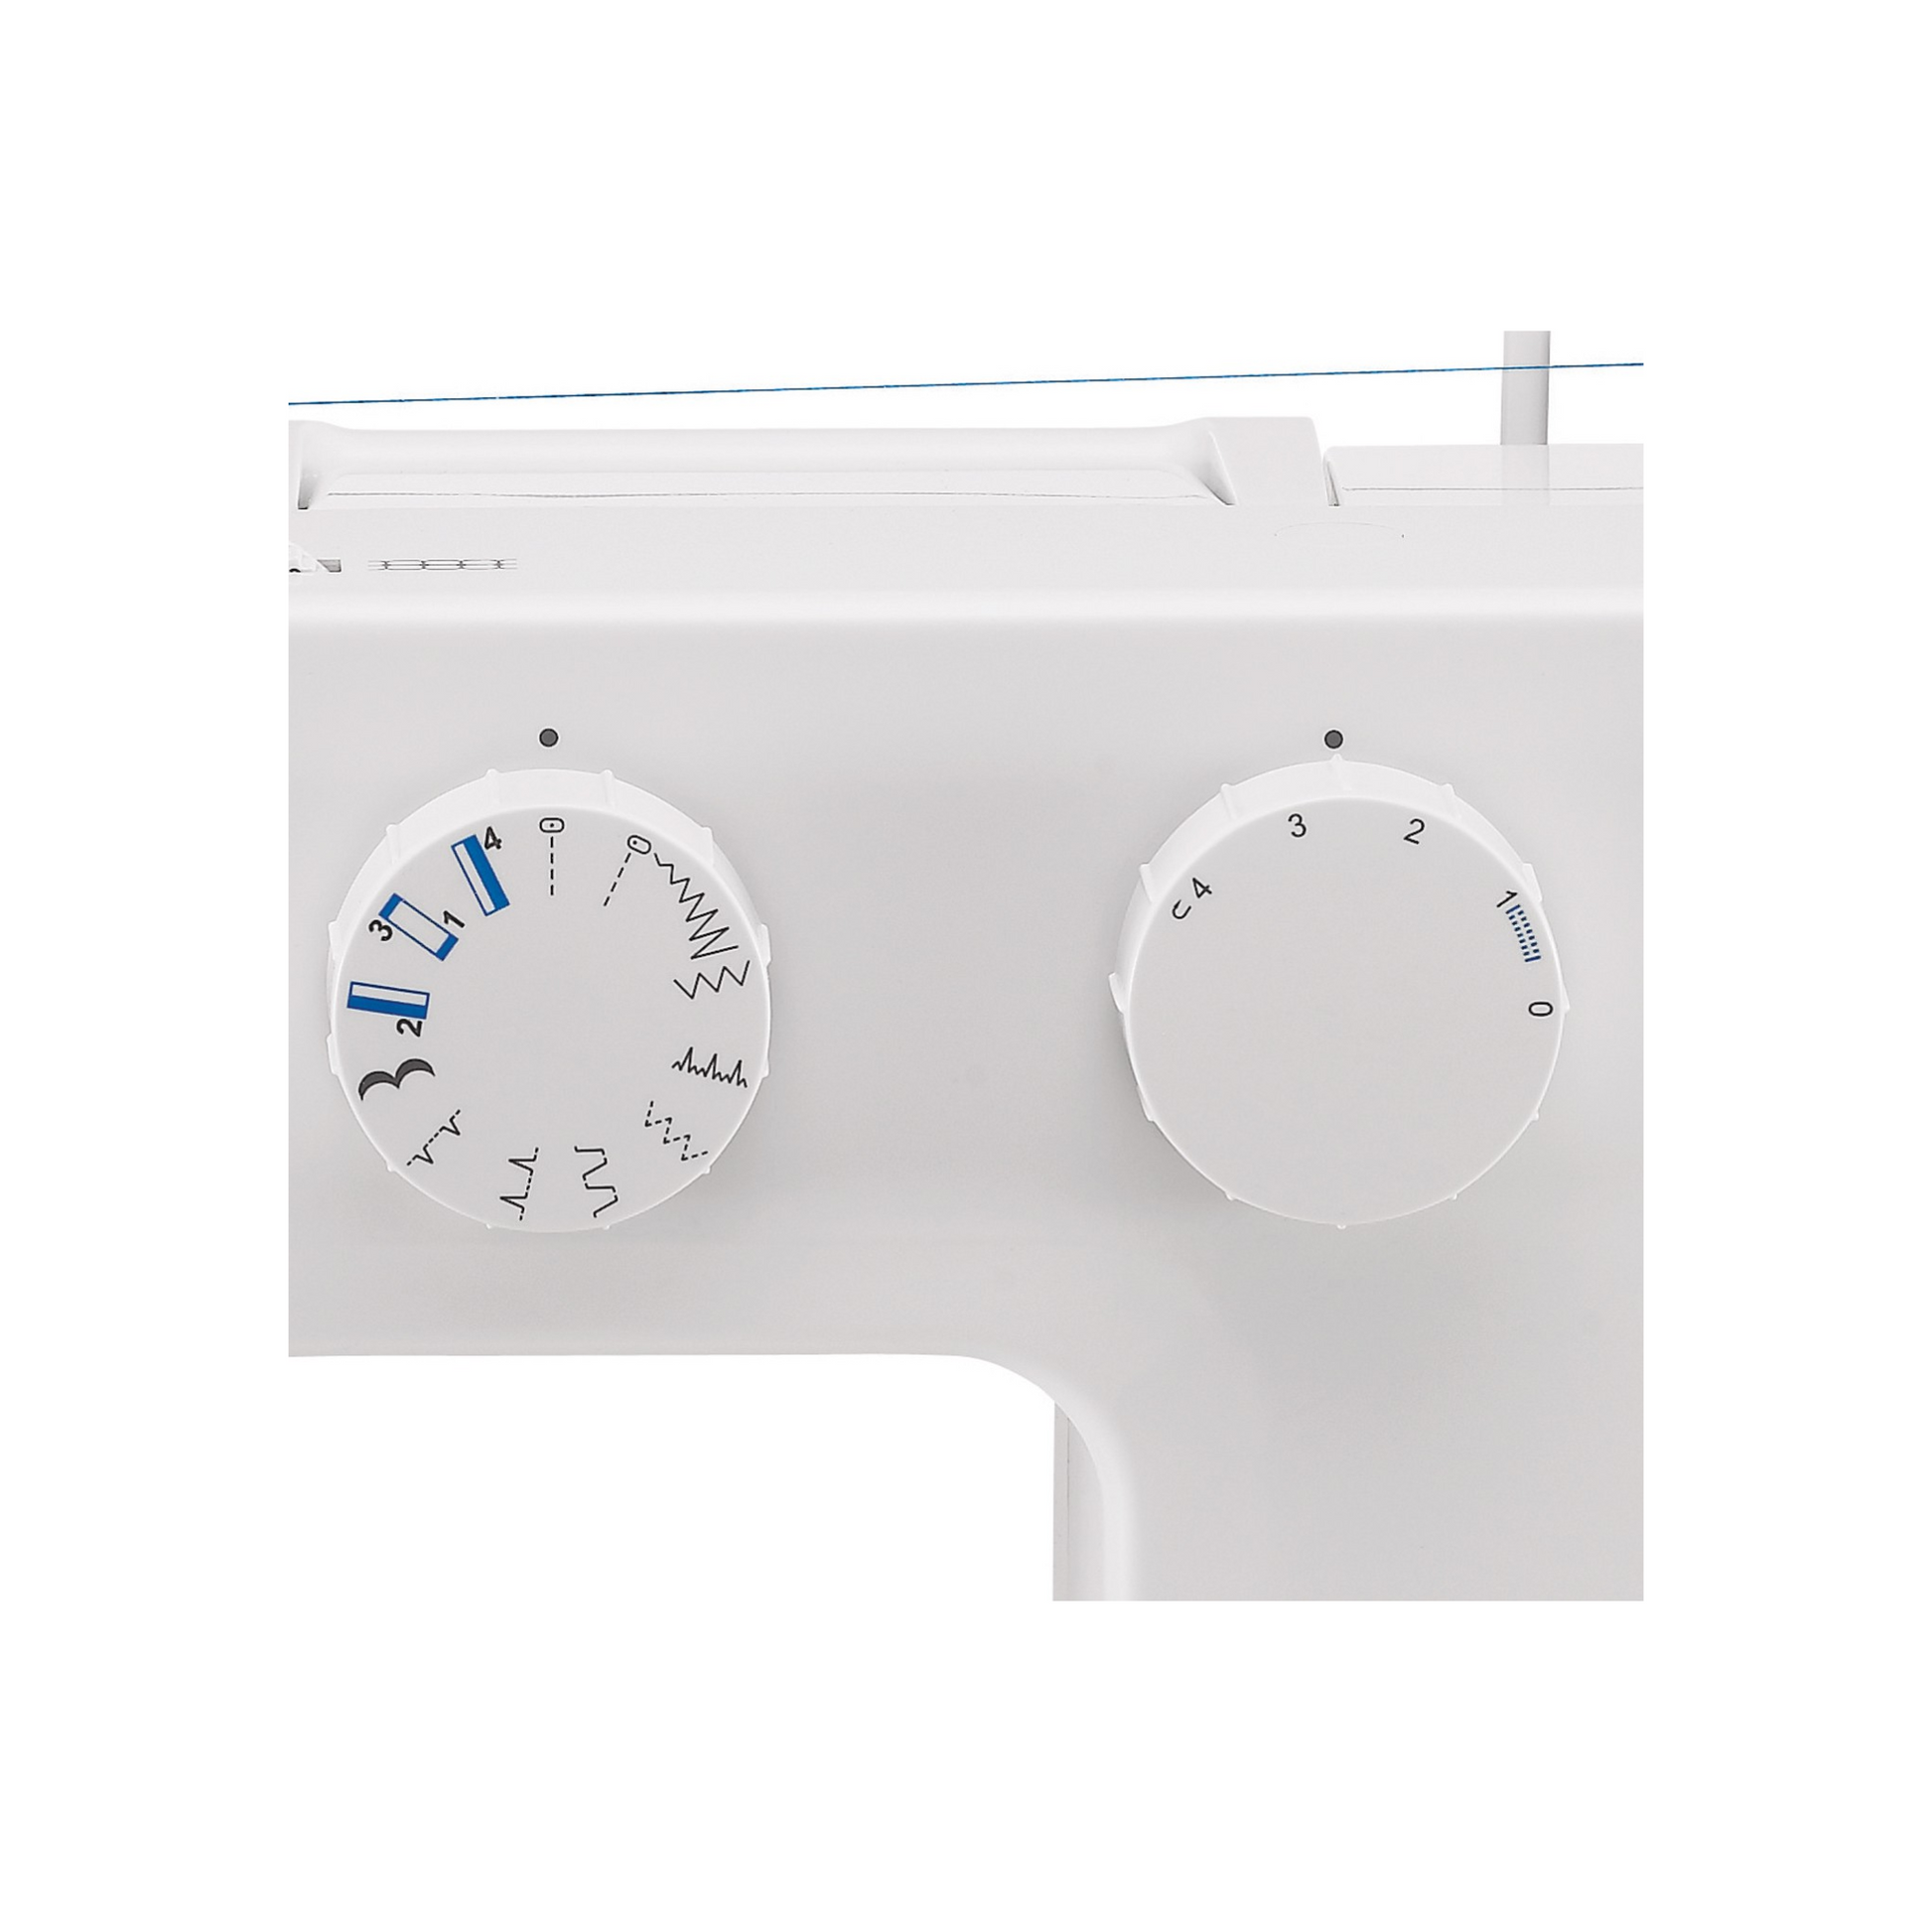 Singer promise 1409 - Sewing machine - White - Close view